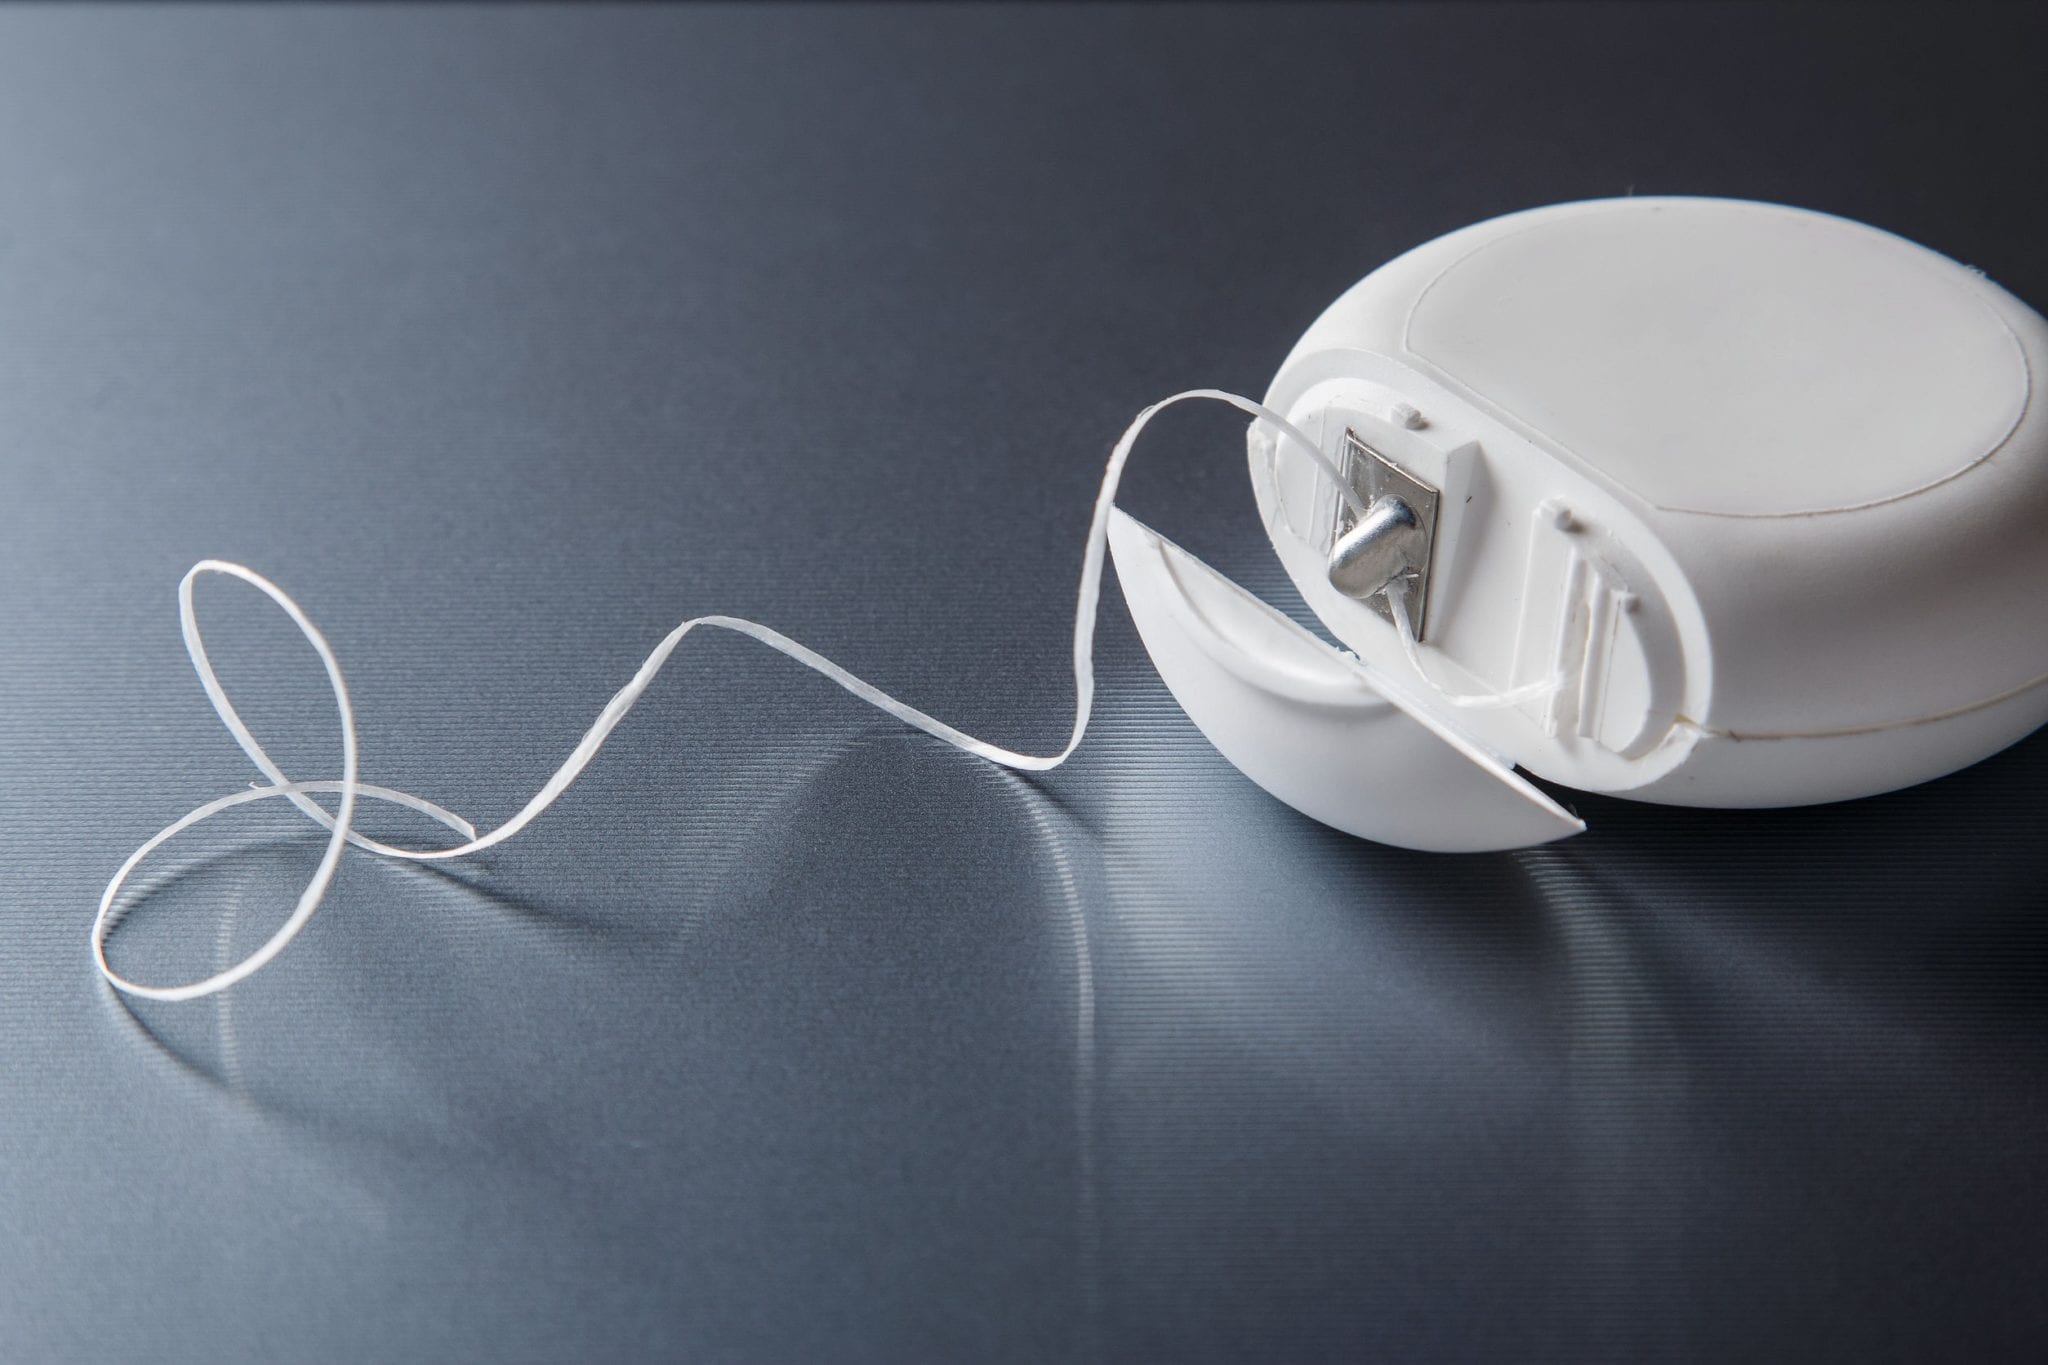 Who Invented Dental Floss (and Why You Should Thank Them)